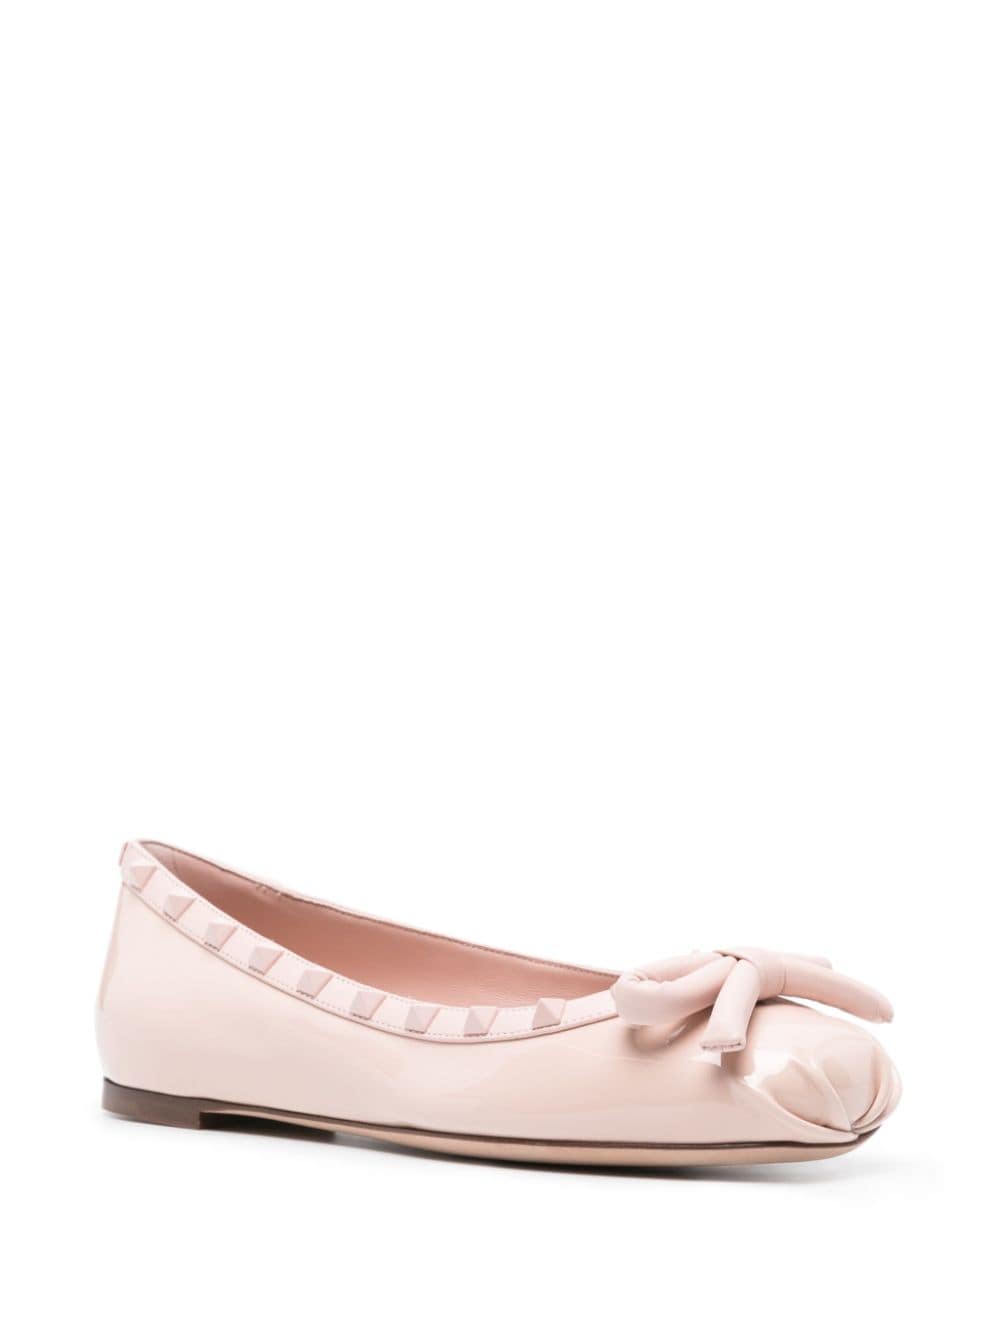 Shop Valentino Rockstud Leather Ballerina Shoes In Pink